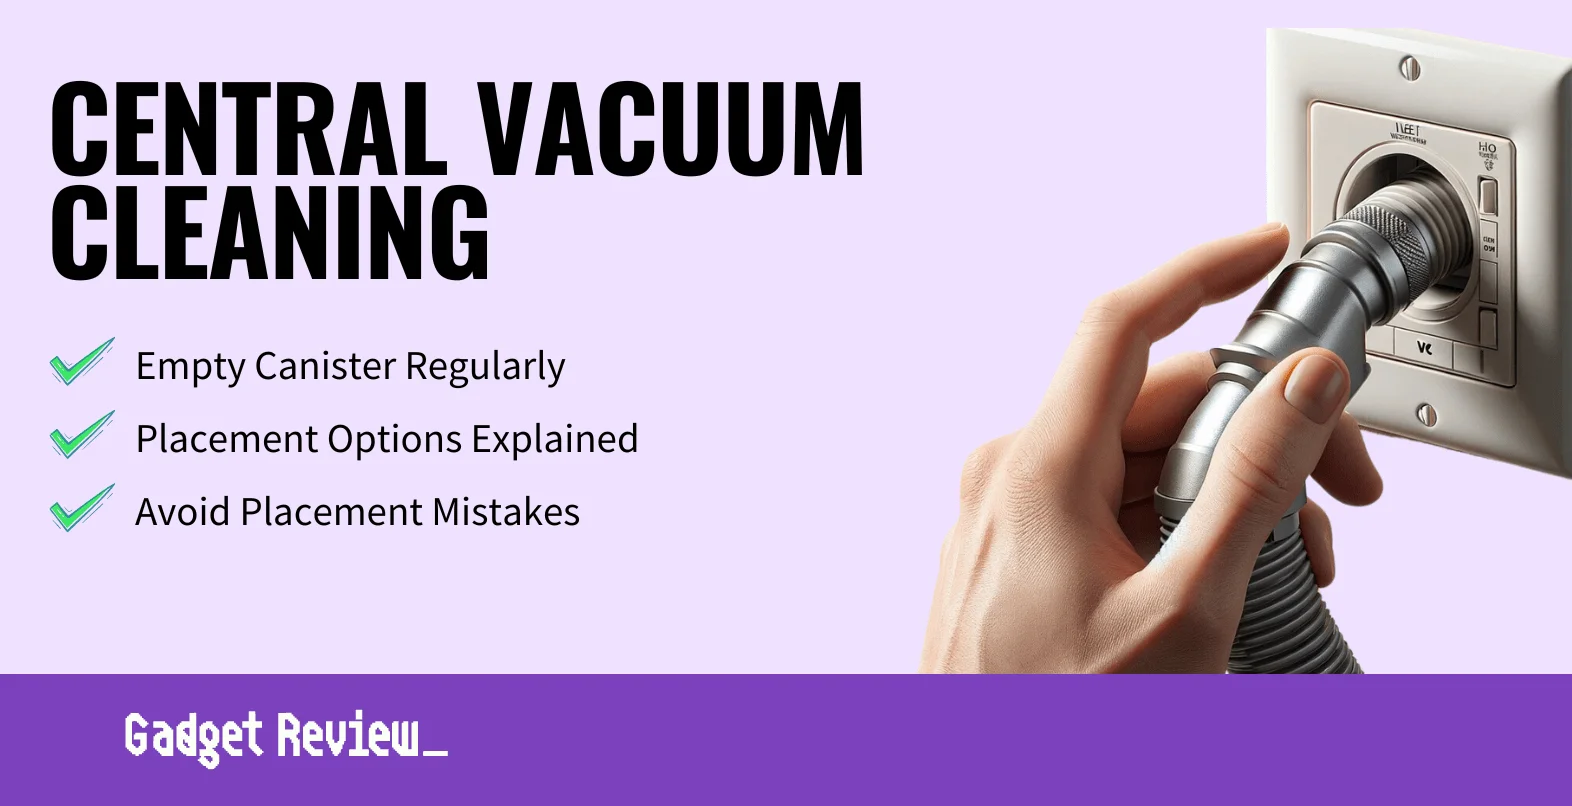 How to Clean a Central Vacuum Cleaner